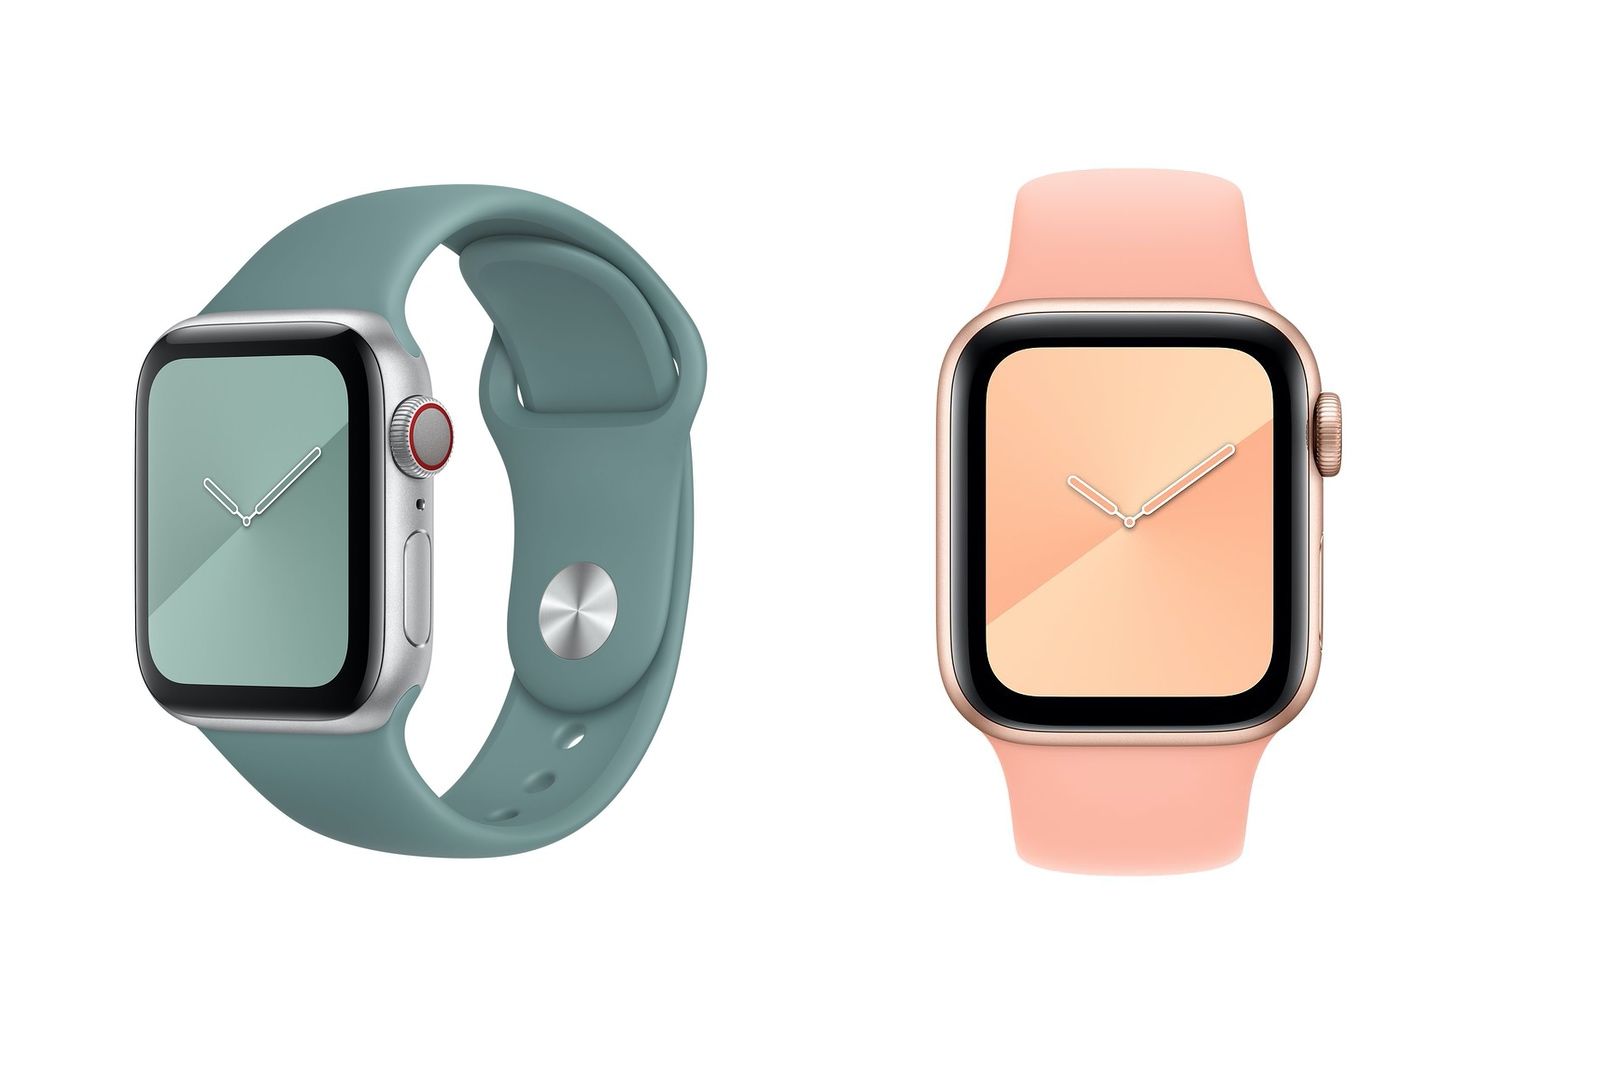 Apple shows off brand new Apple Watch straps and iPhone 11 cases image 1